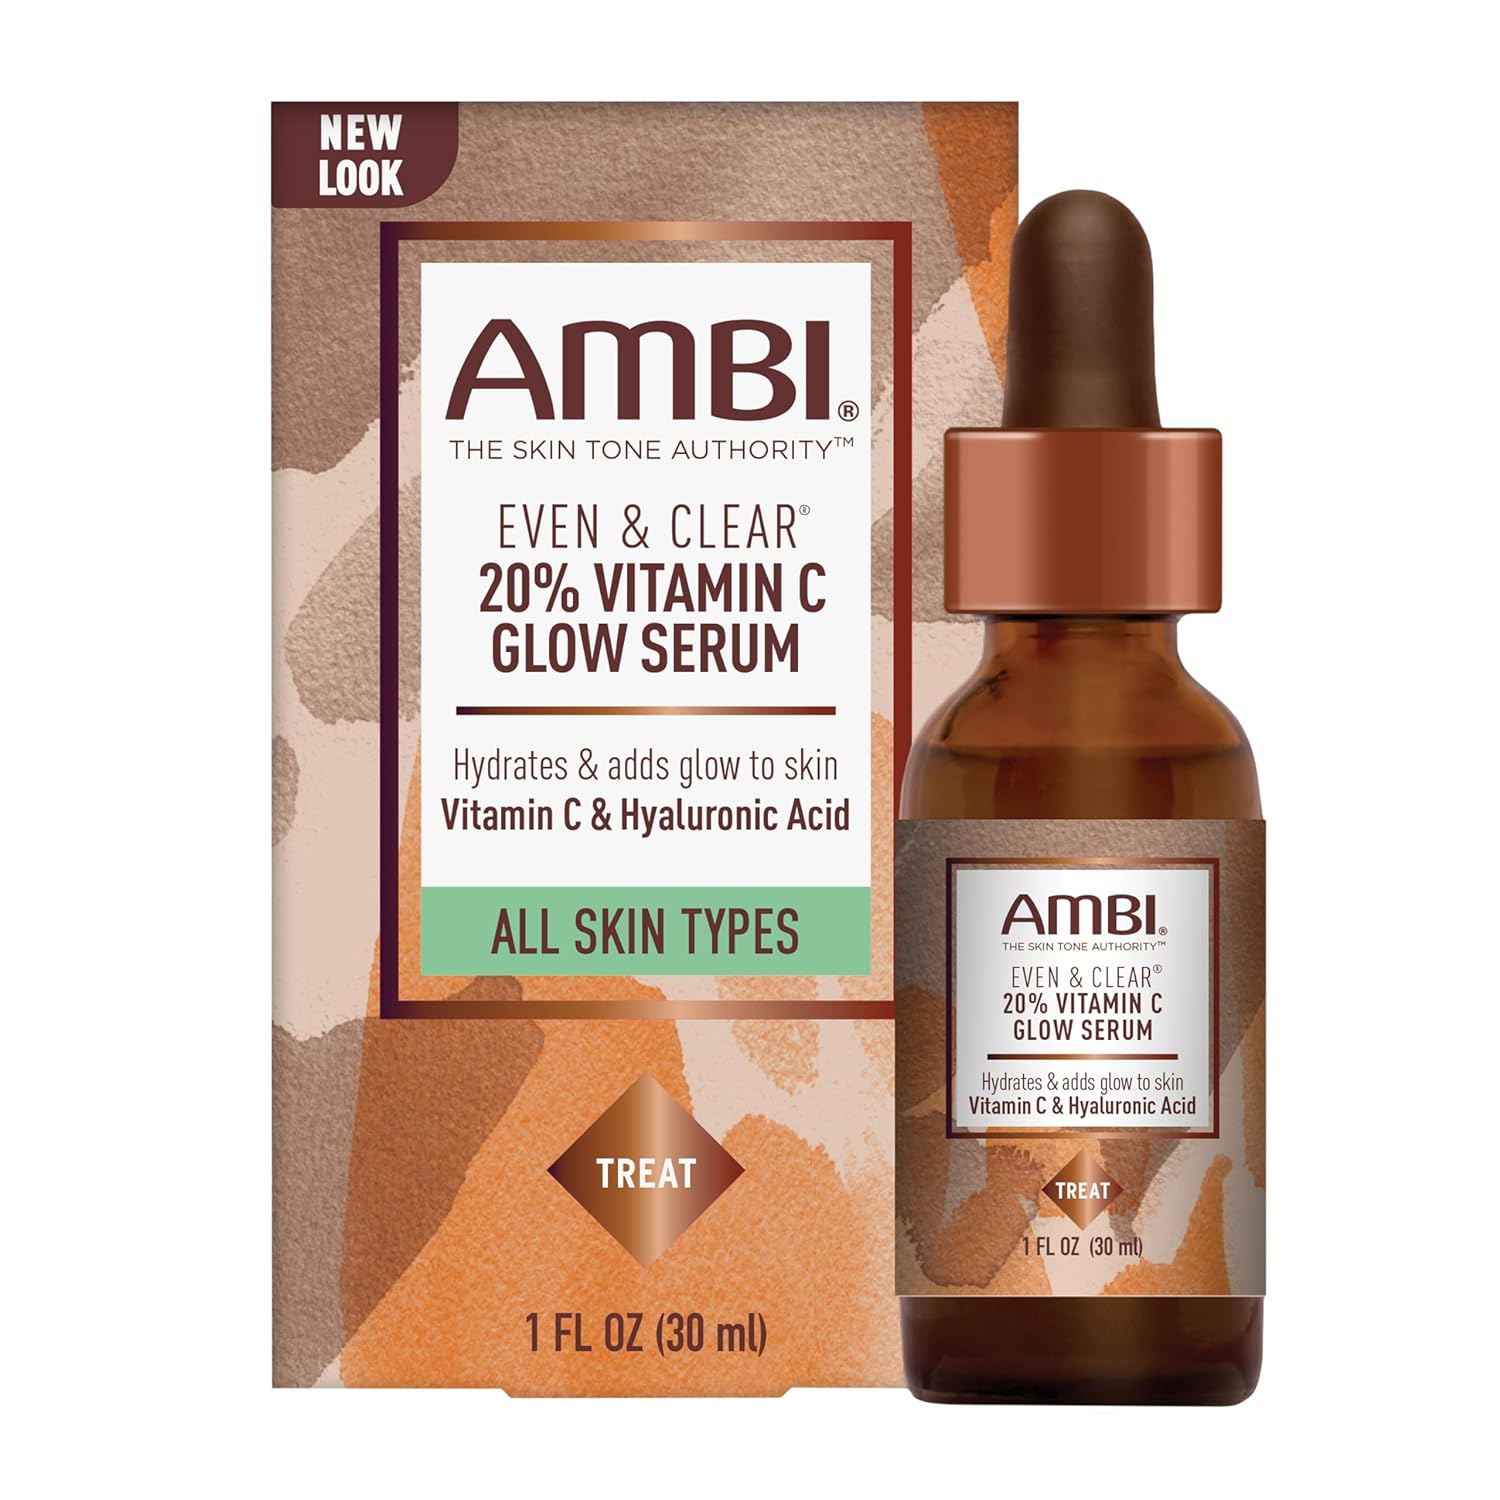 Ambi Even & Clear Vitamin C Infused Glow Serum for All Skin Types to help Cleanse Skin, Brighten